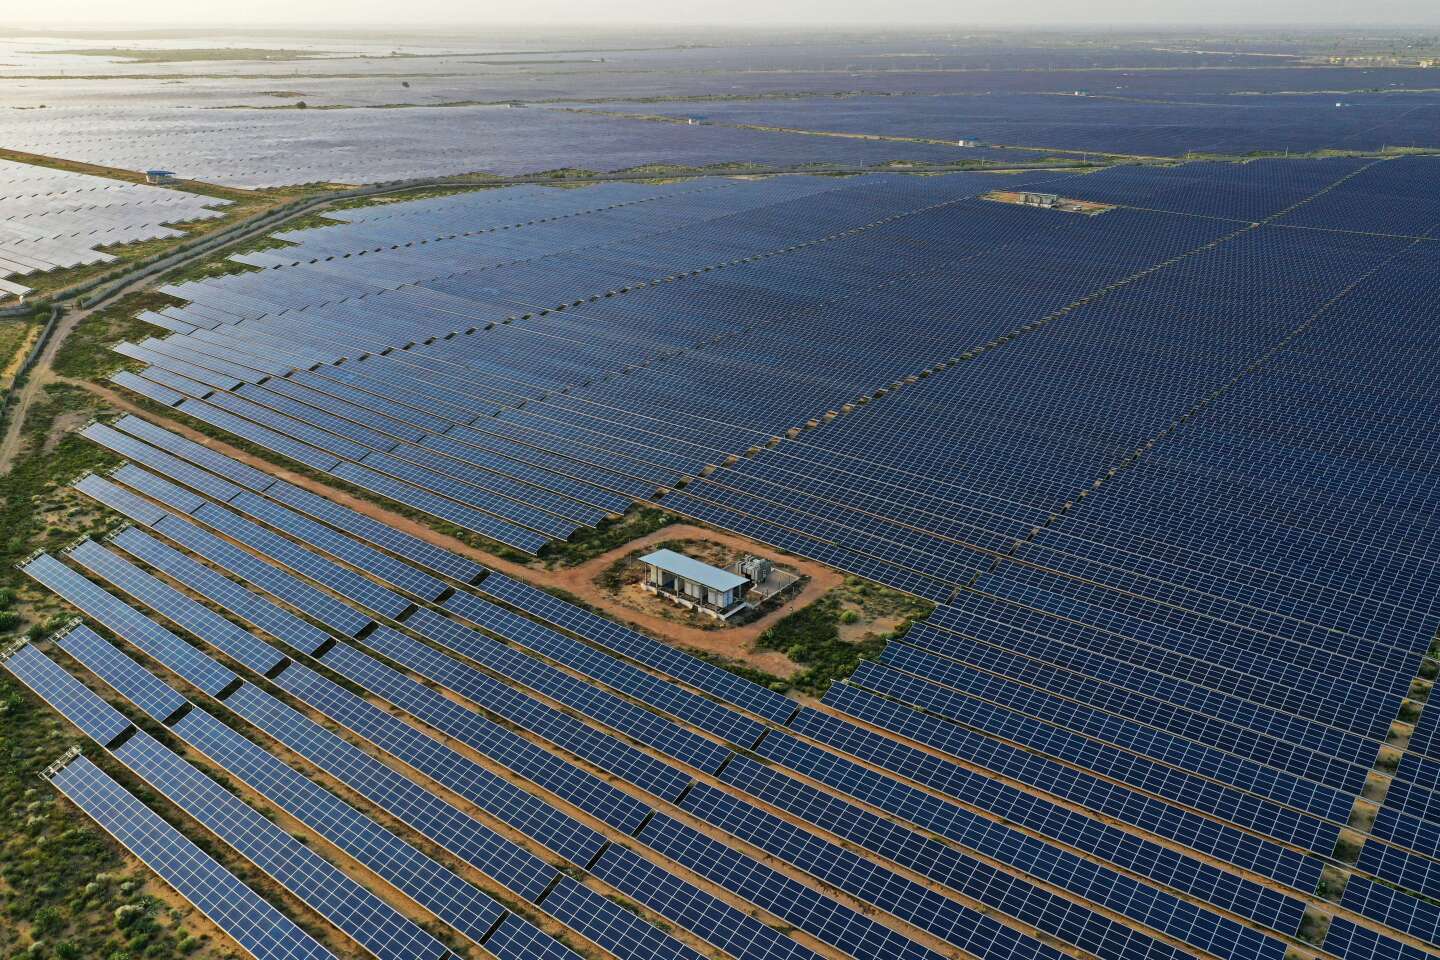 From Rajasthan to Kerala, India dreams of solar power